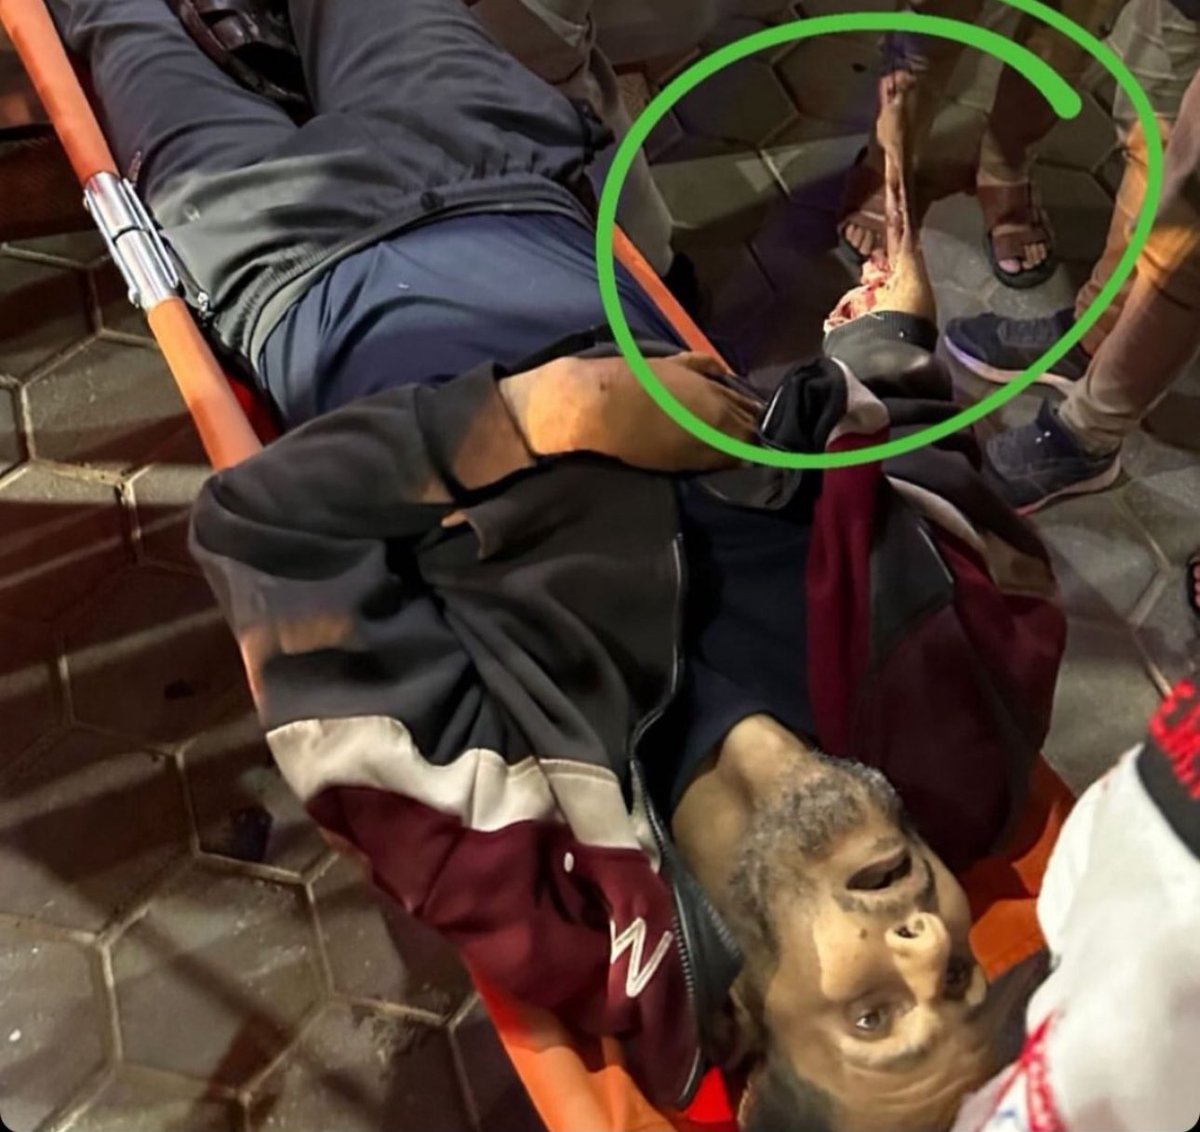 This Palestinian man was killed by a Zionist airstrike, the aidworkers couldn’t get to him because of the danger so stray dogs savagely ate and ripped his arm to the bone 

Gaza